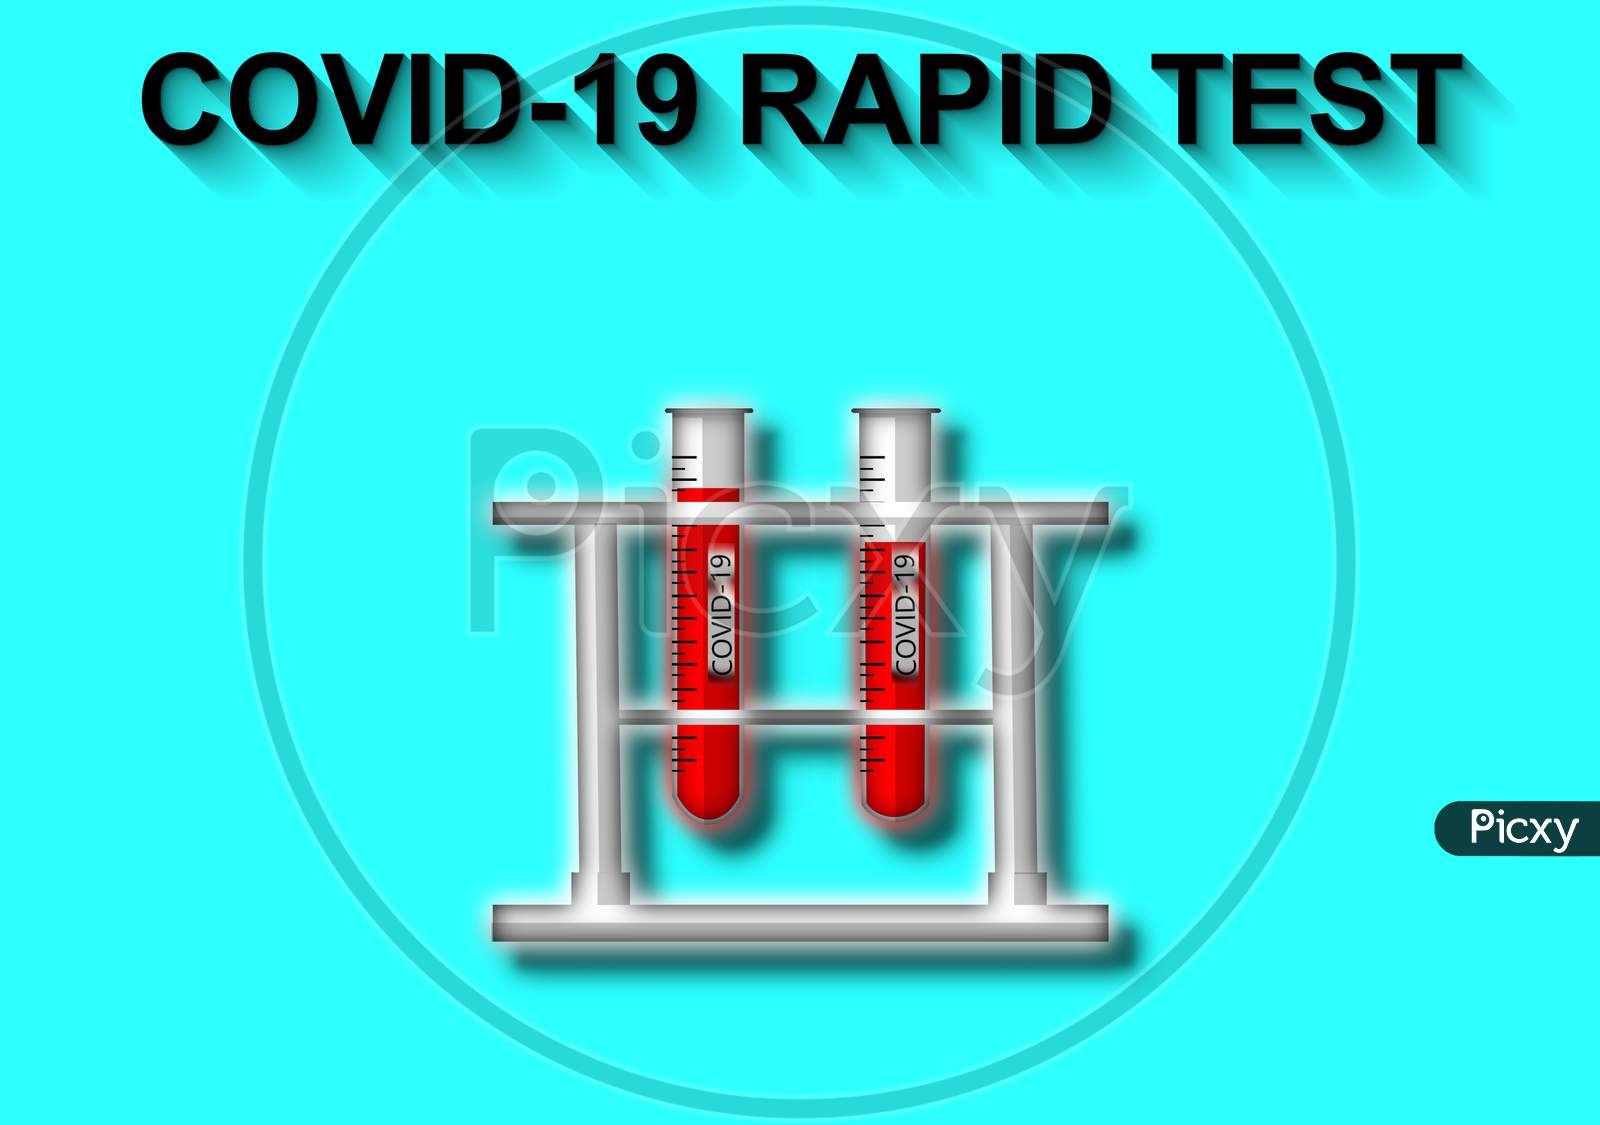 3D Illustration Graphic Of Set Of Glass Tube Test With Blood Sample And The Text 'Covid-19 Rapid Test' Isolated On Blue Background. Blood Sample Icon.